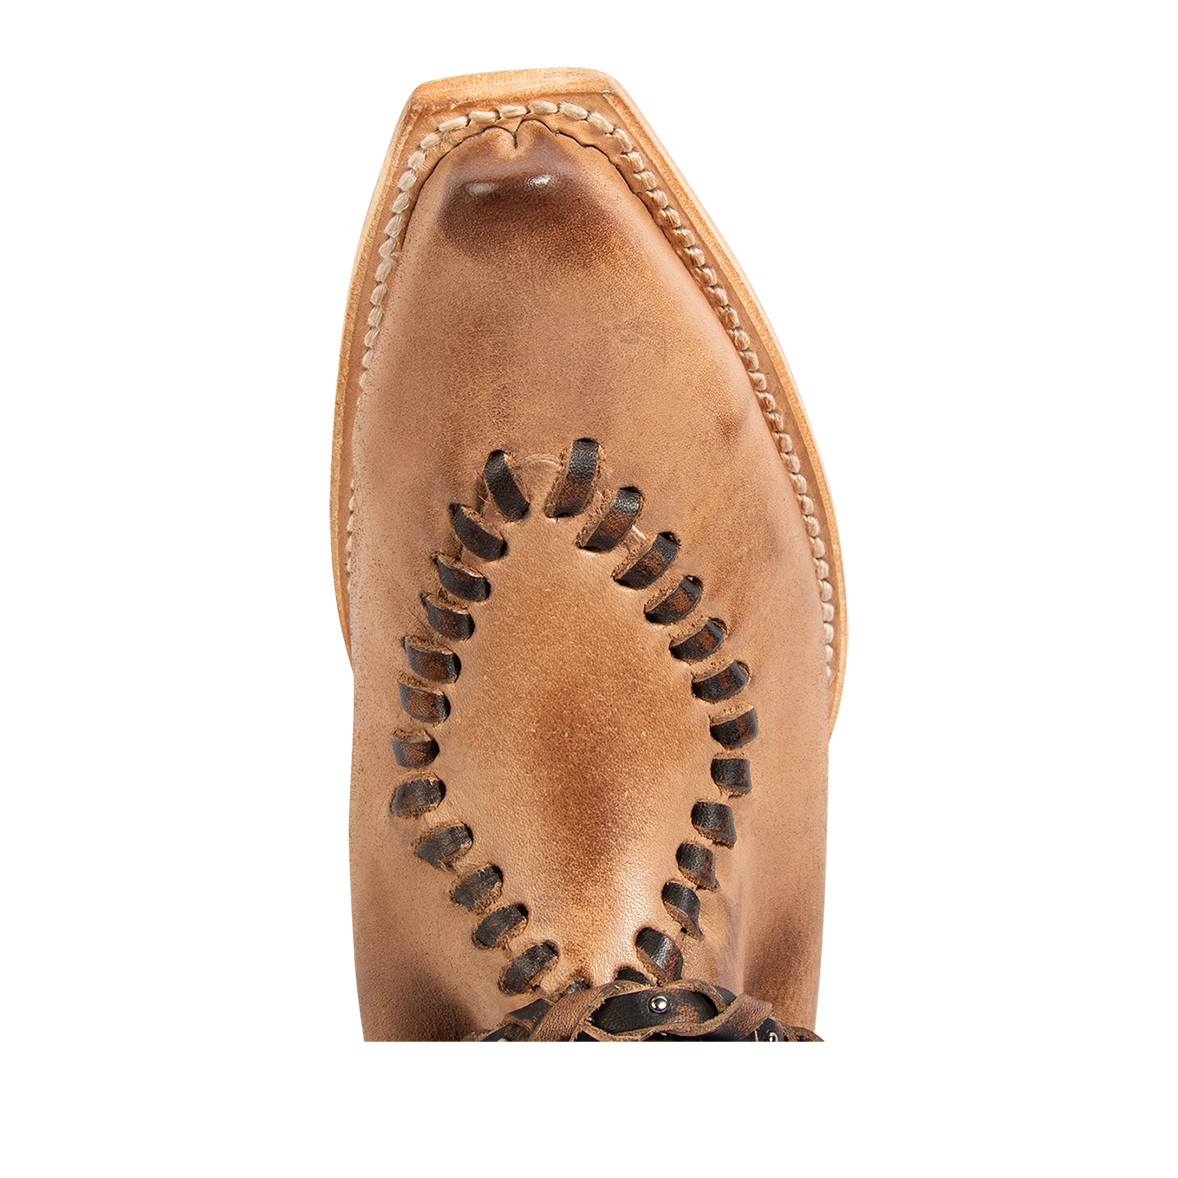 Top view showing whip stitch detailing and snip toe construction on FREEBIRD women's Whimsical tan leather bootie